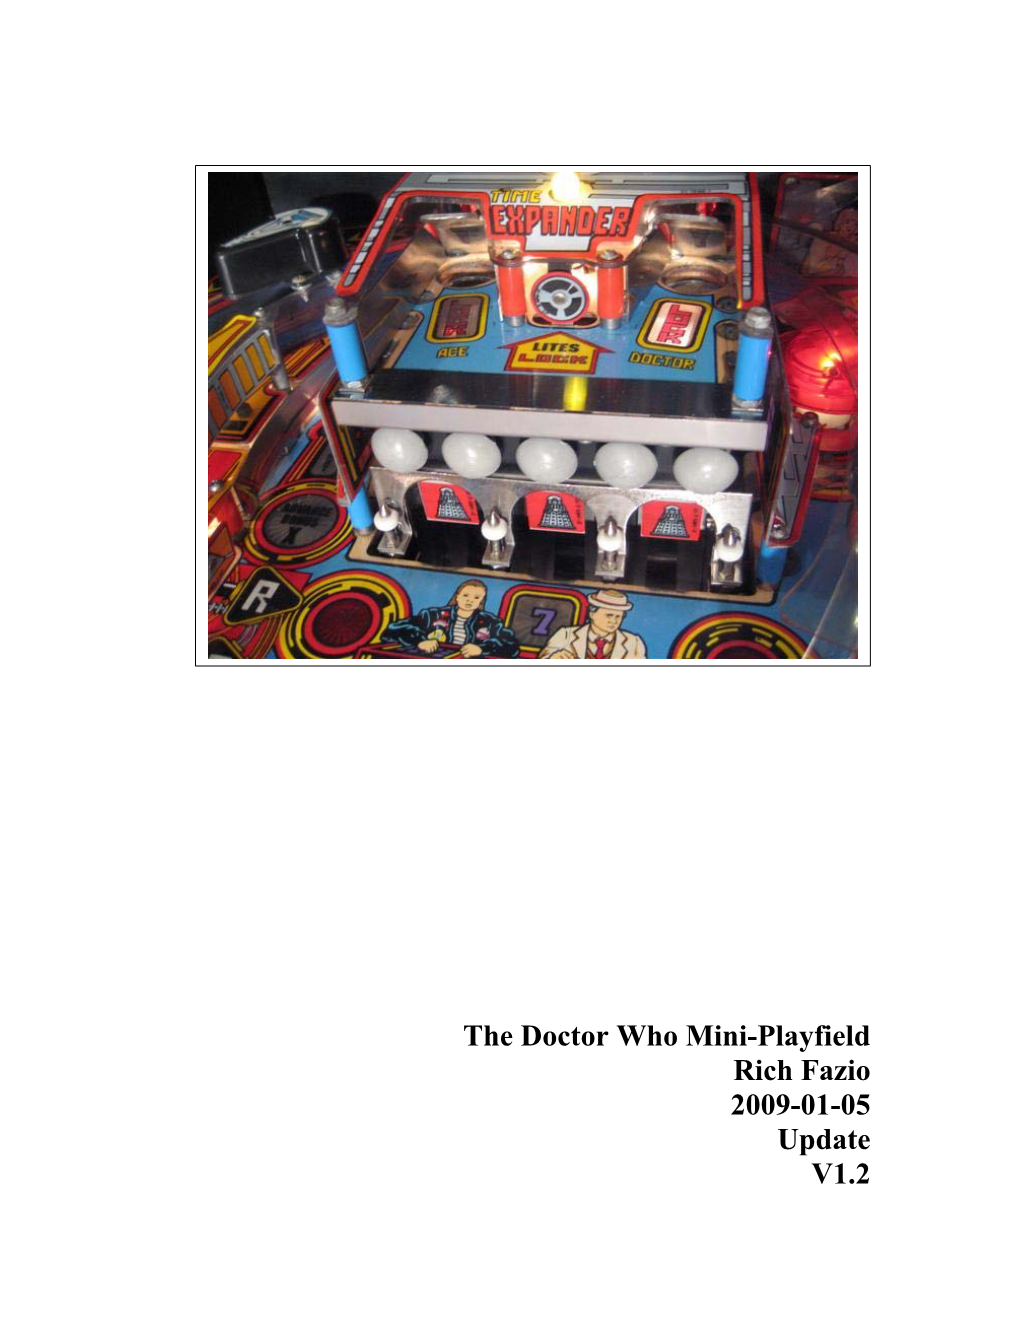 The Doctor Who Mini-Playfield Rich Fazio 2009-01-05 Update V1.2